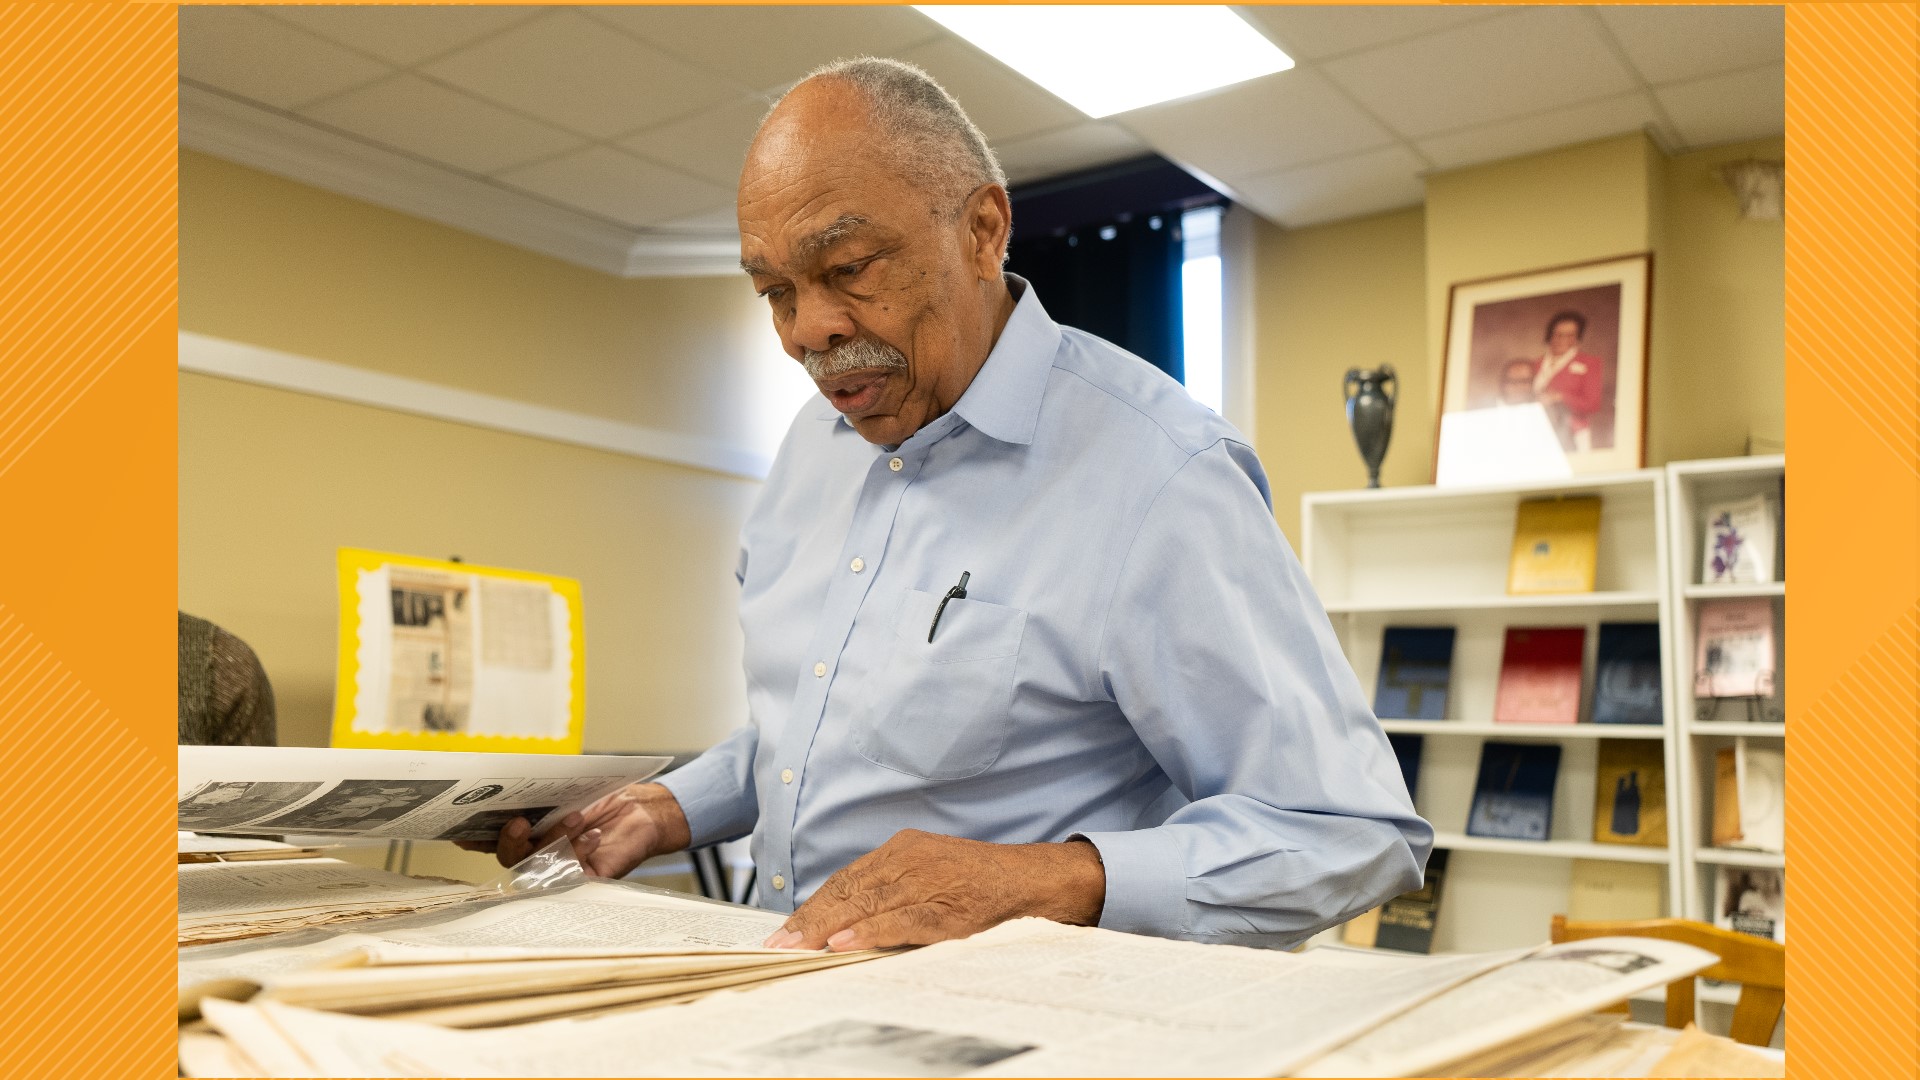 James Felder serves as the director of the Lincoln High School Museum.